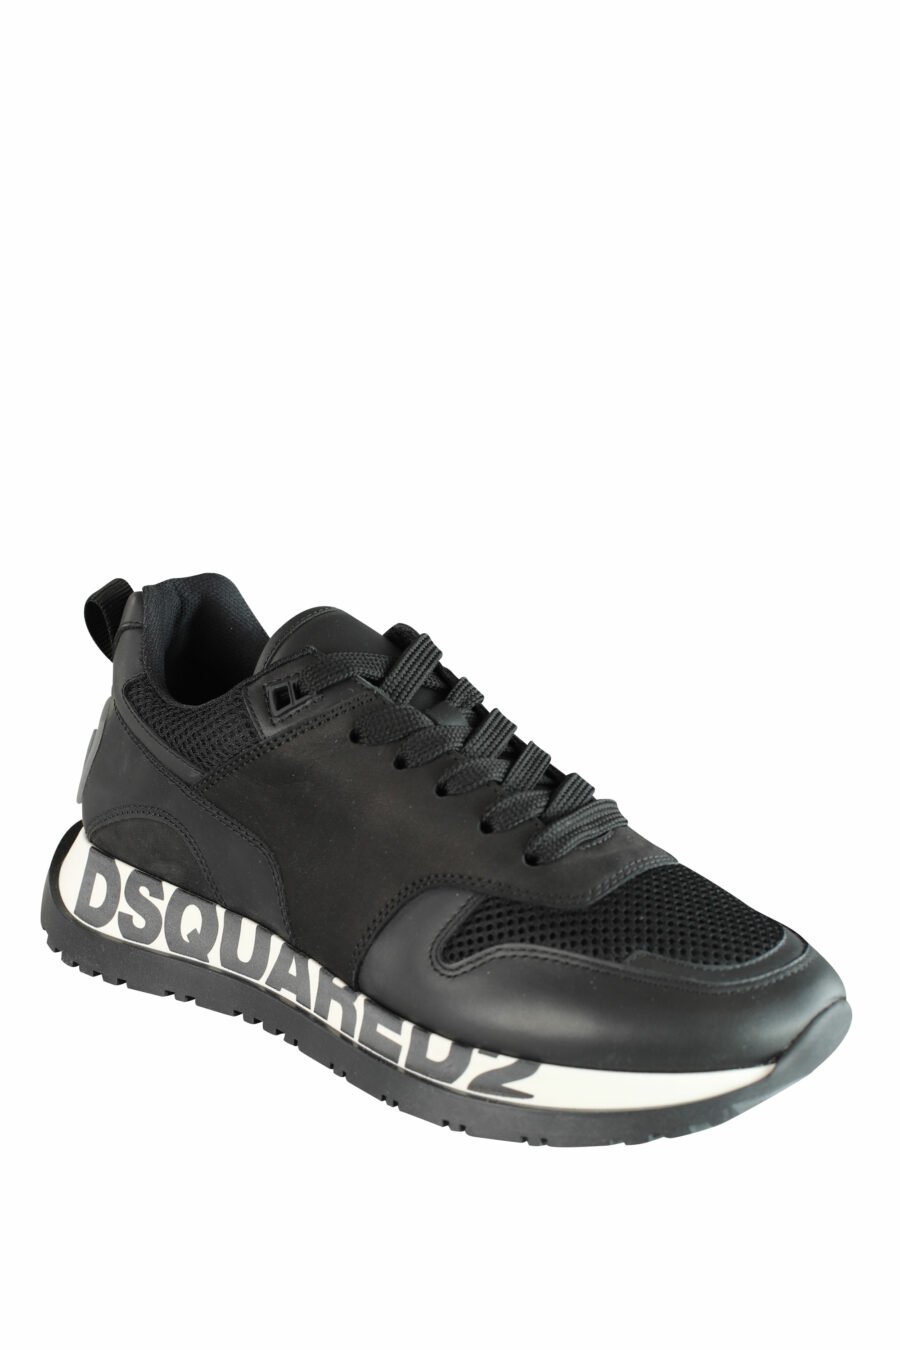 Black running shoes with white sole and black logo - IMG 1431